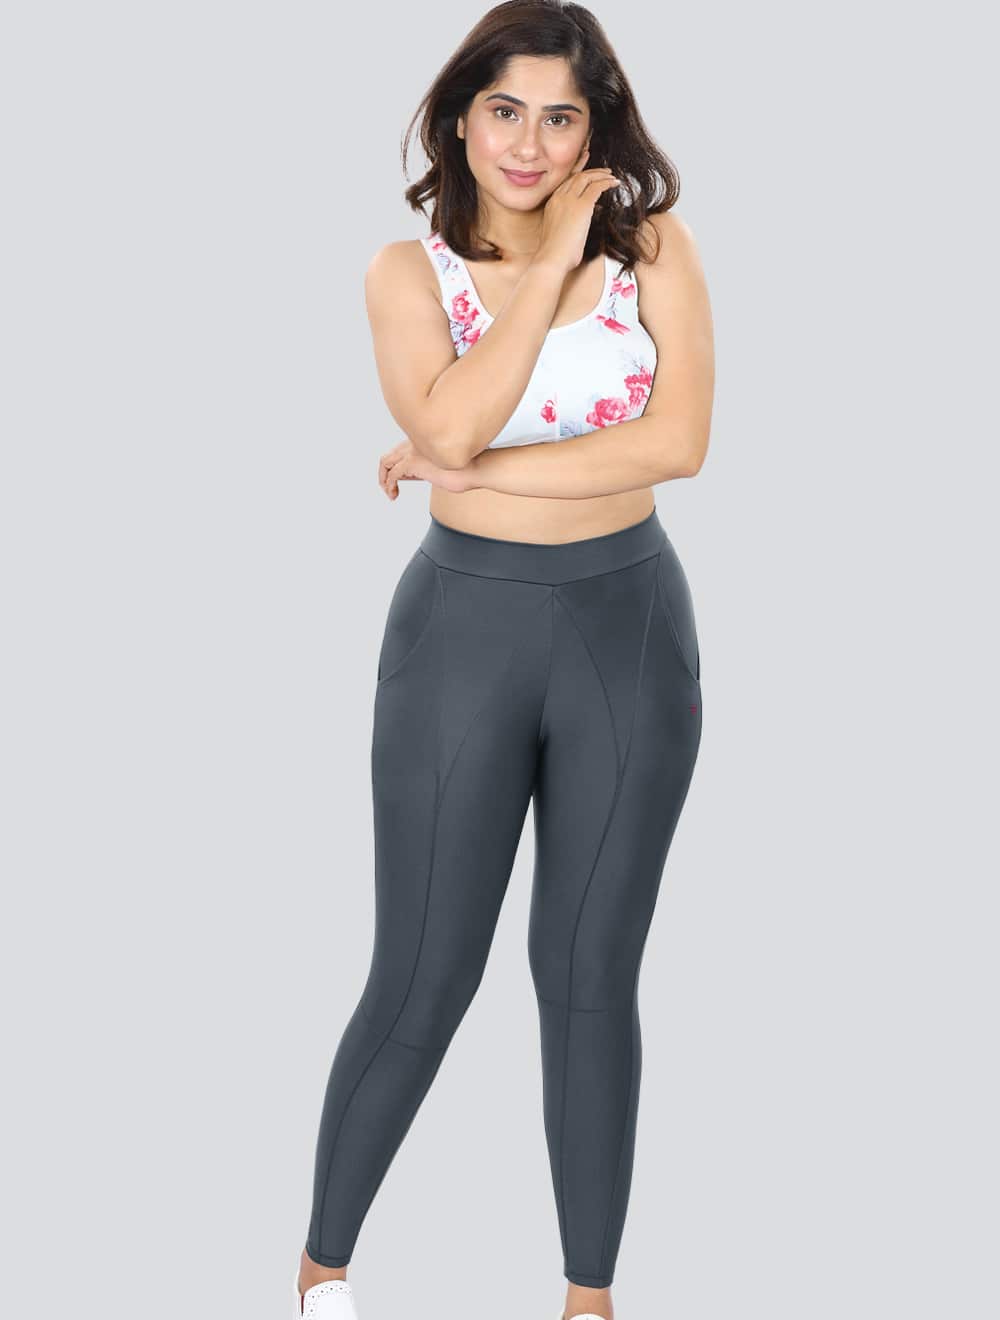 Workout Pant for Women